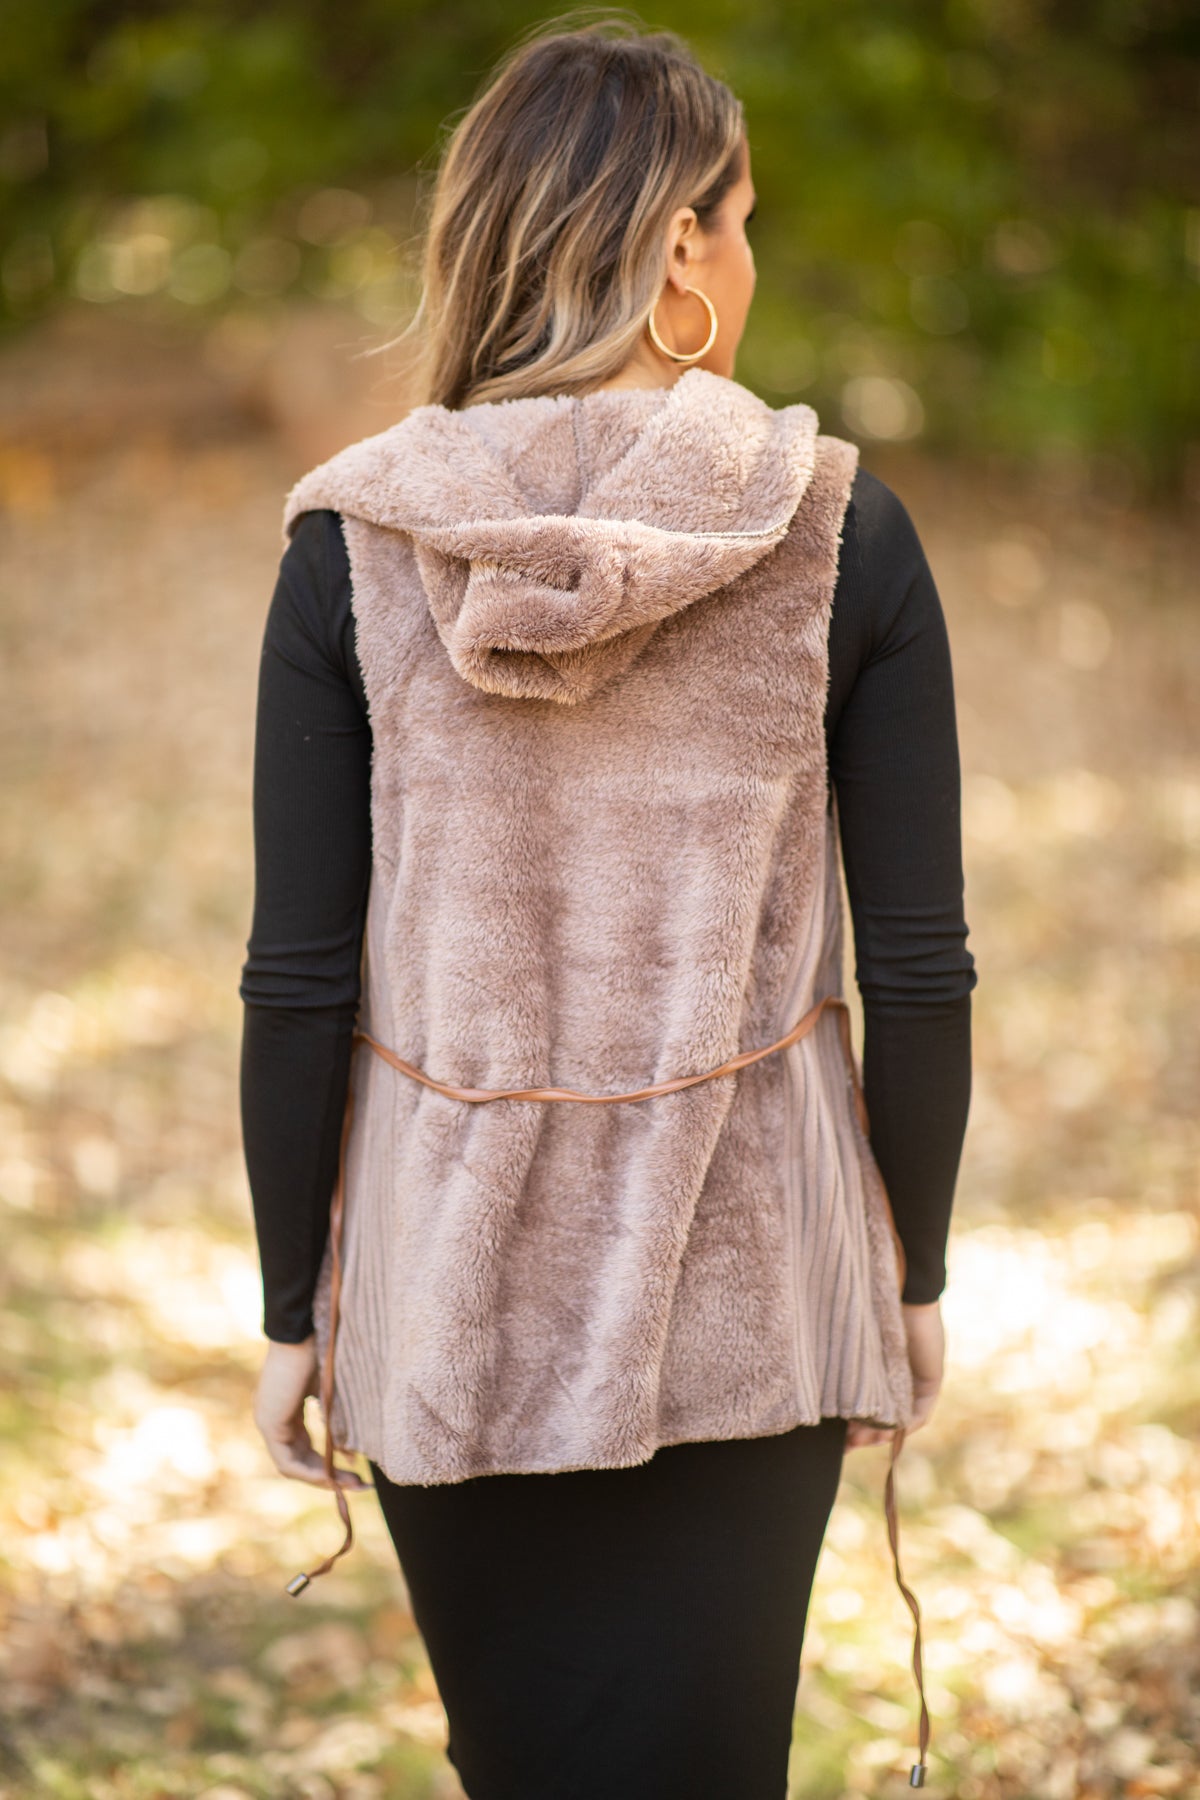 Brown Faux Fur Vest With Tie Waist - Filly Flair